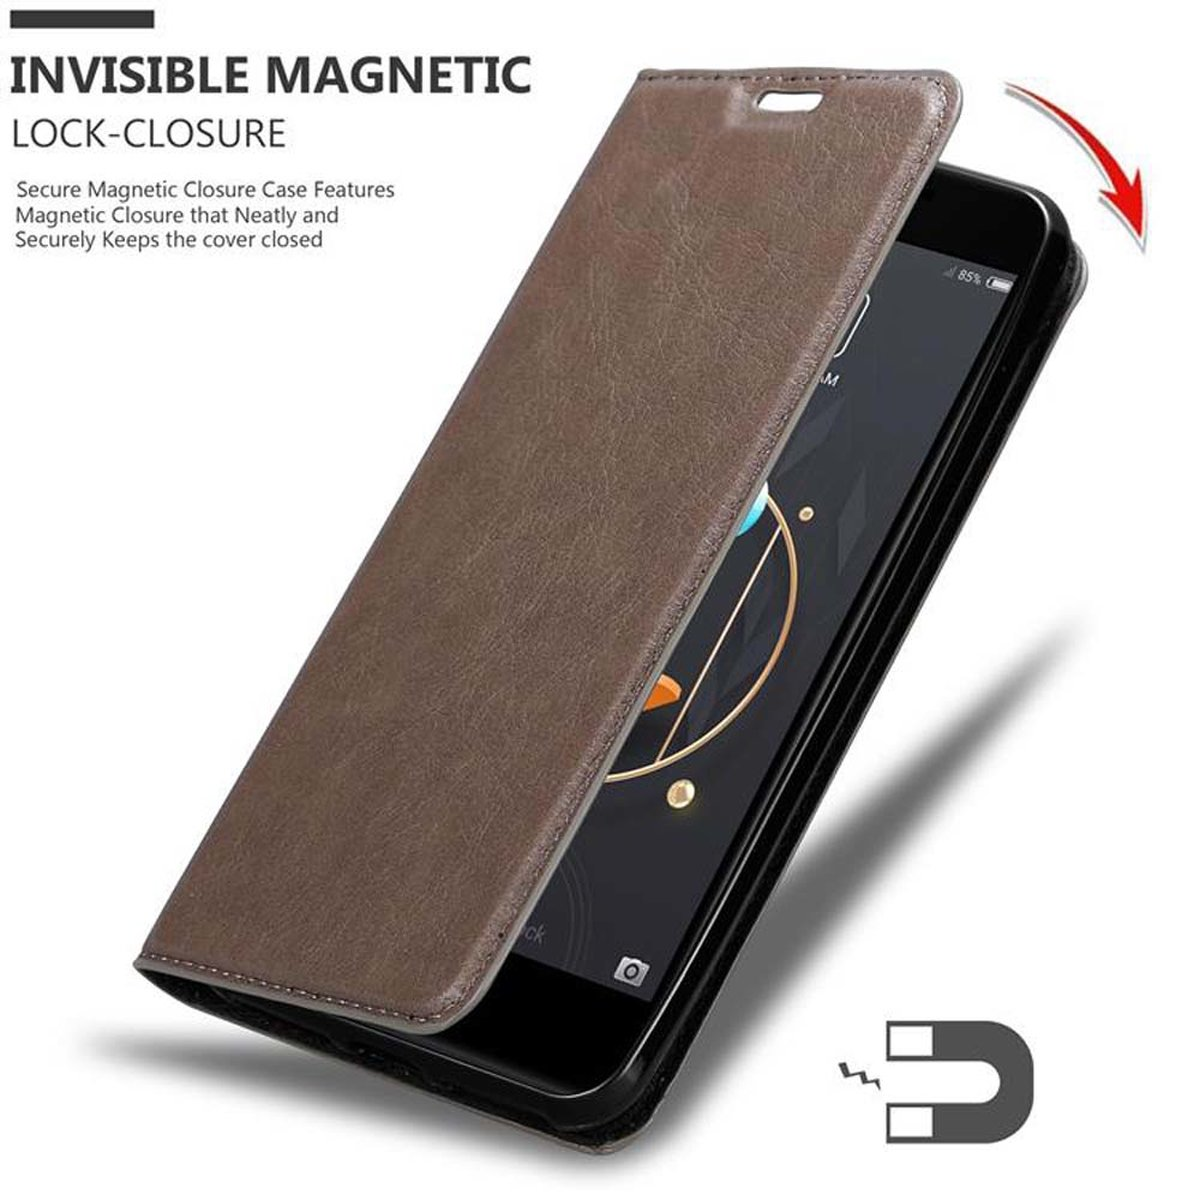 Magnet, Nubia CADORABO Invisible Book Hülle BRAUN KAFFEE ZTE, M2, Bookcover,